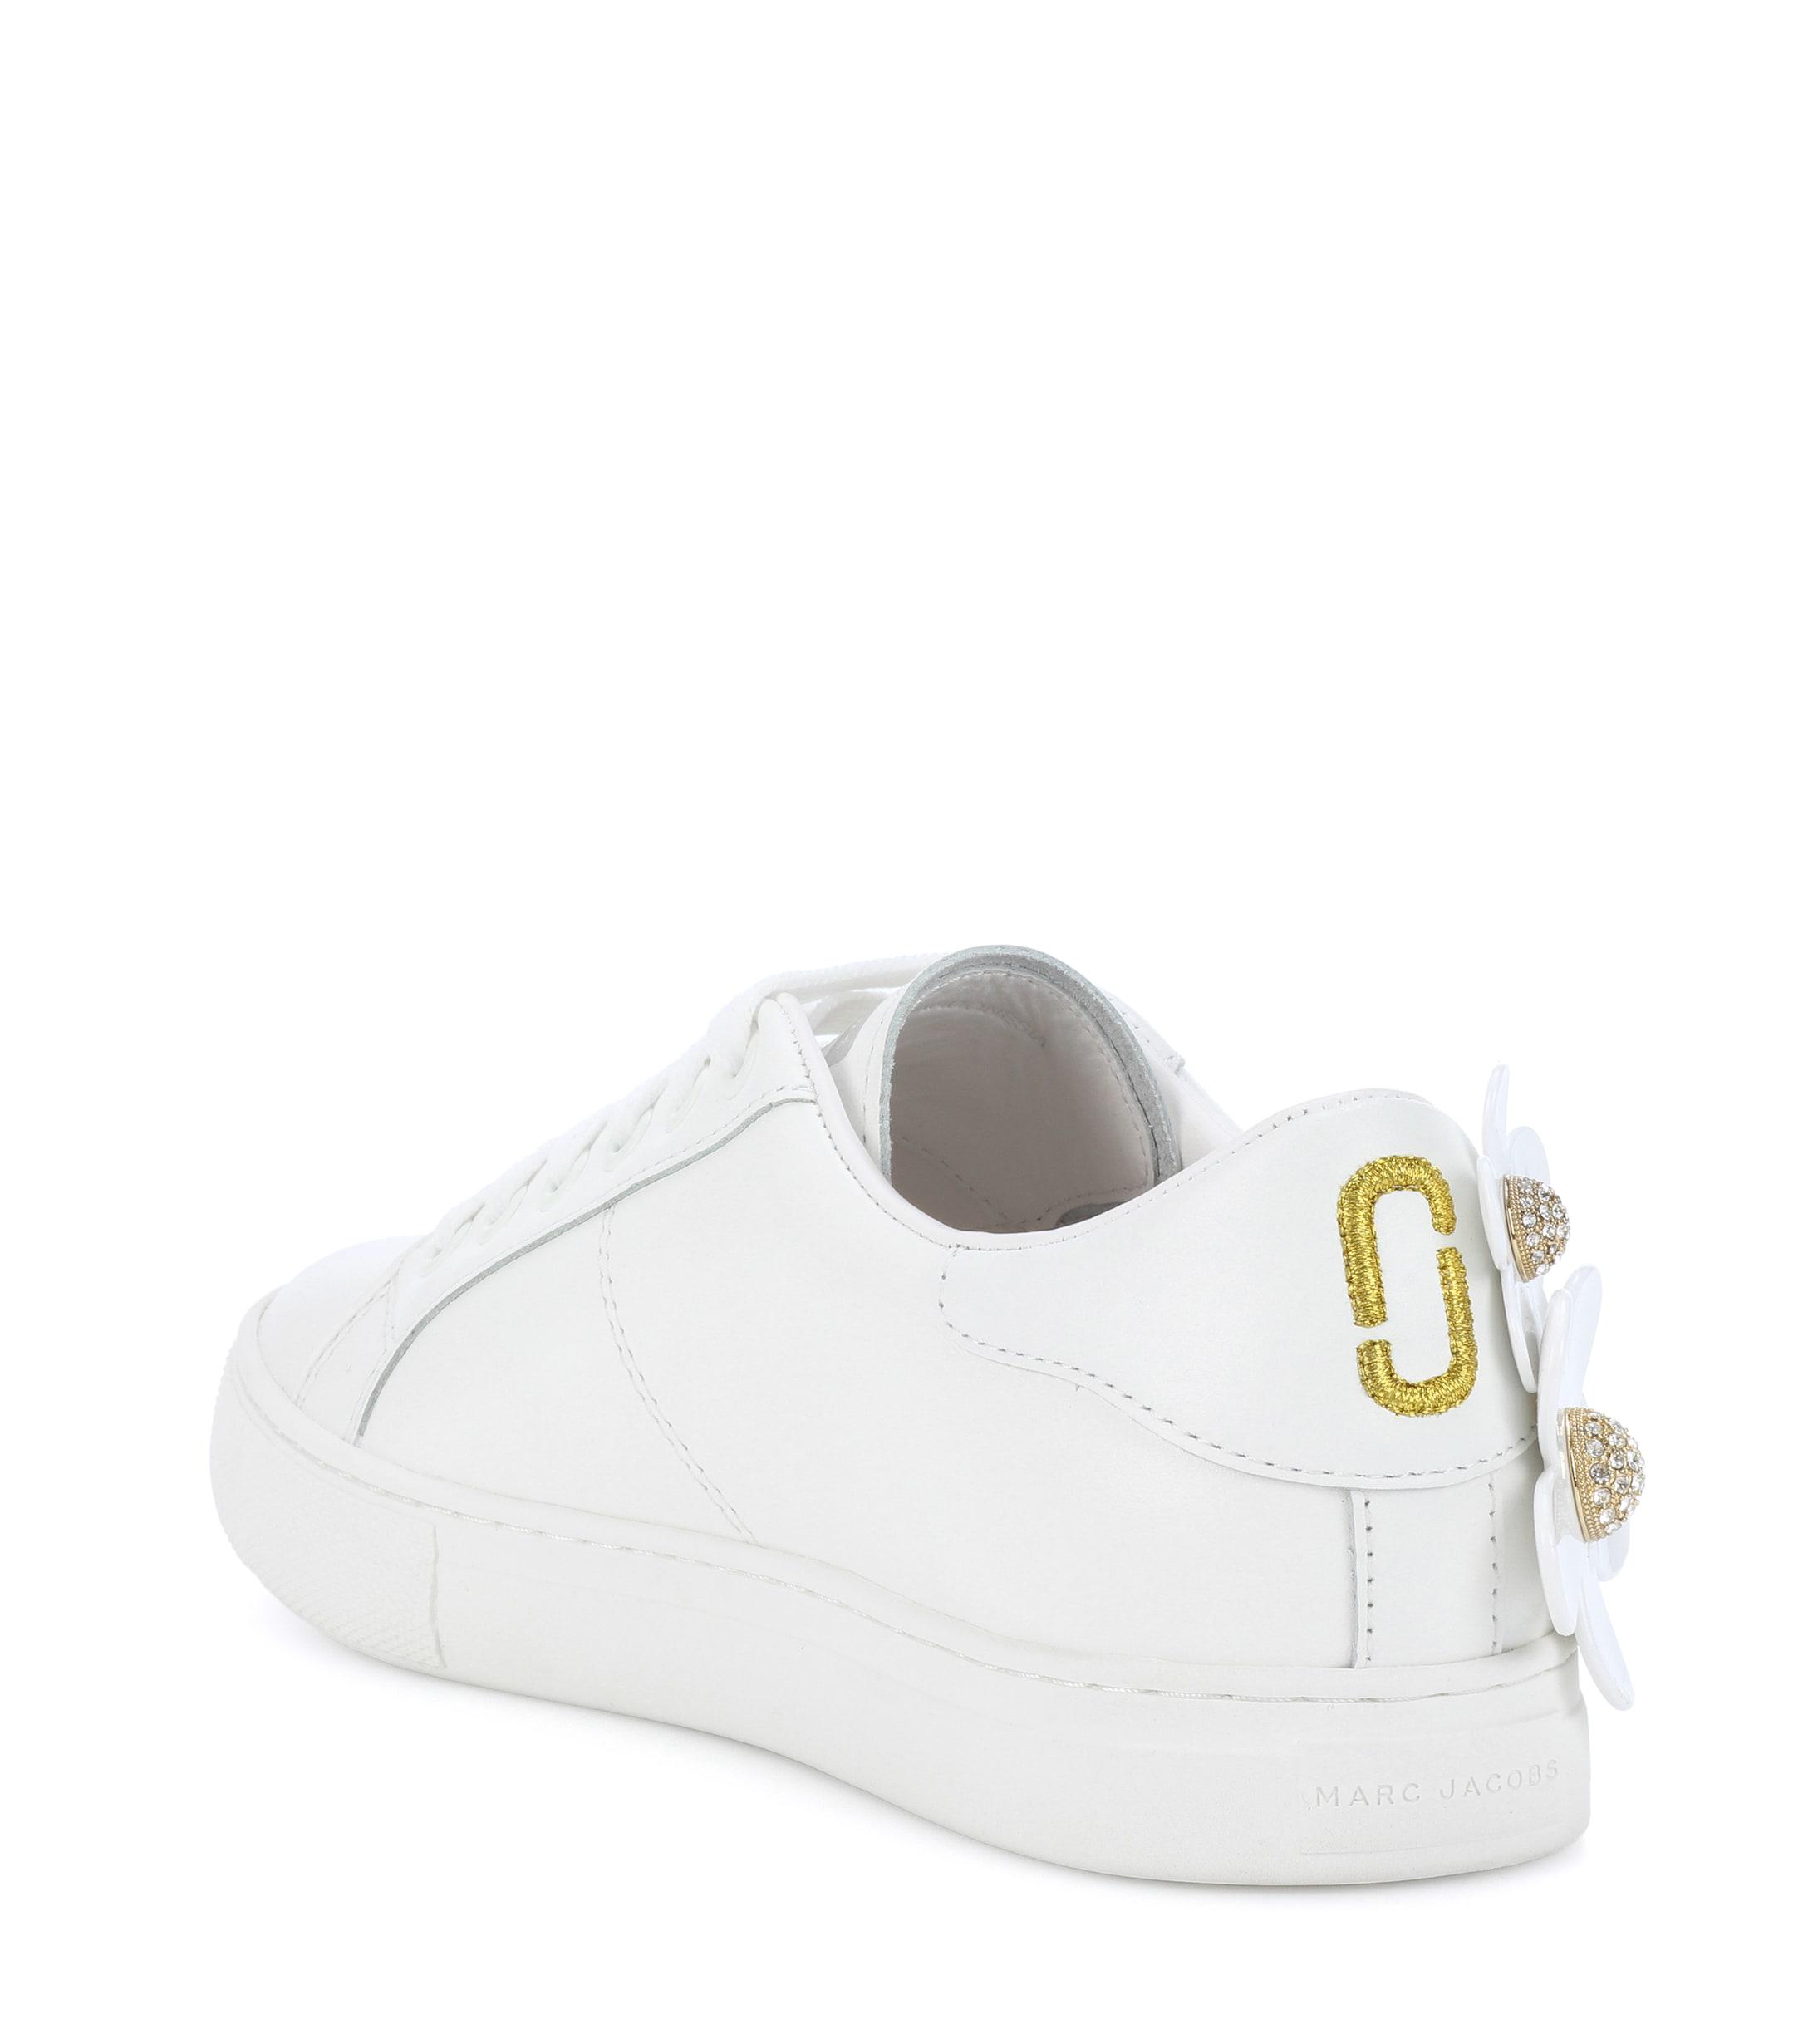 Marc Jacobs Flower-embellished Leather Sneakers in White | Lyst